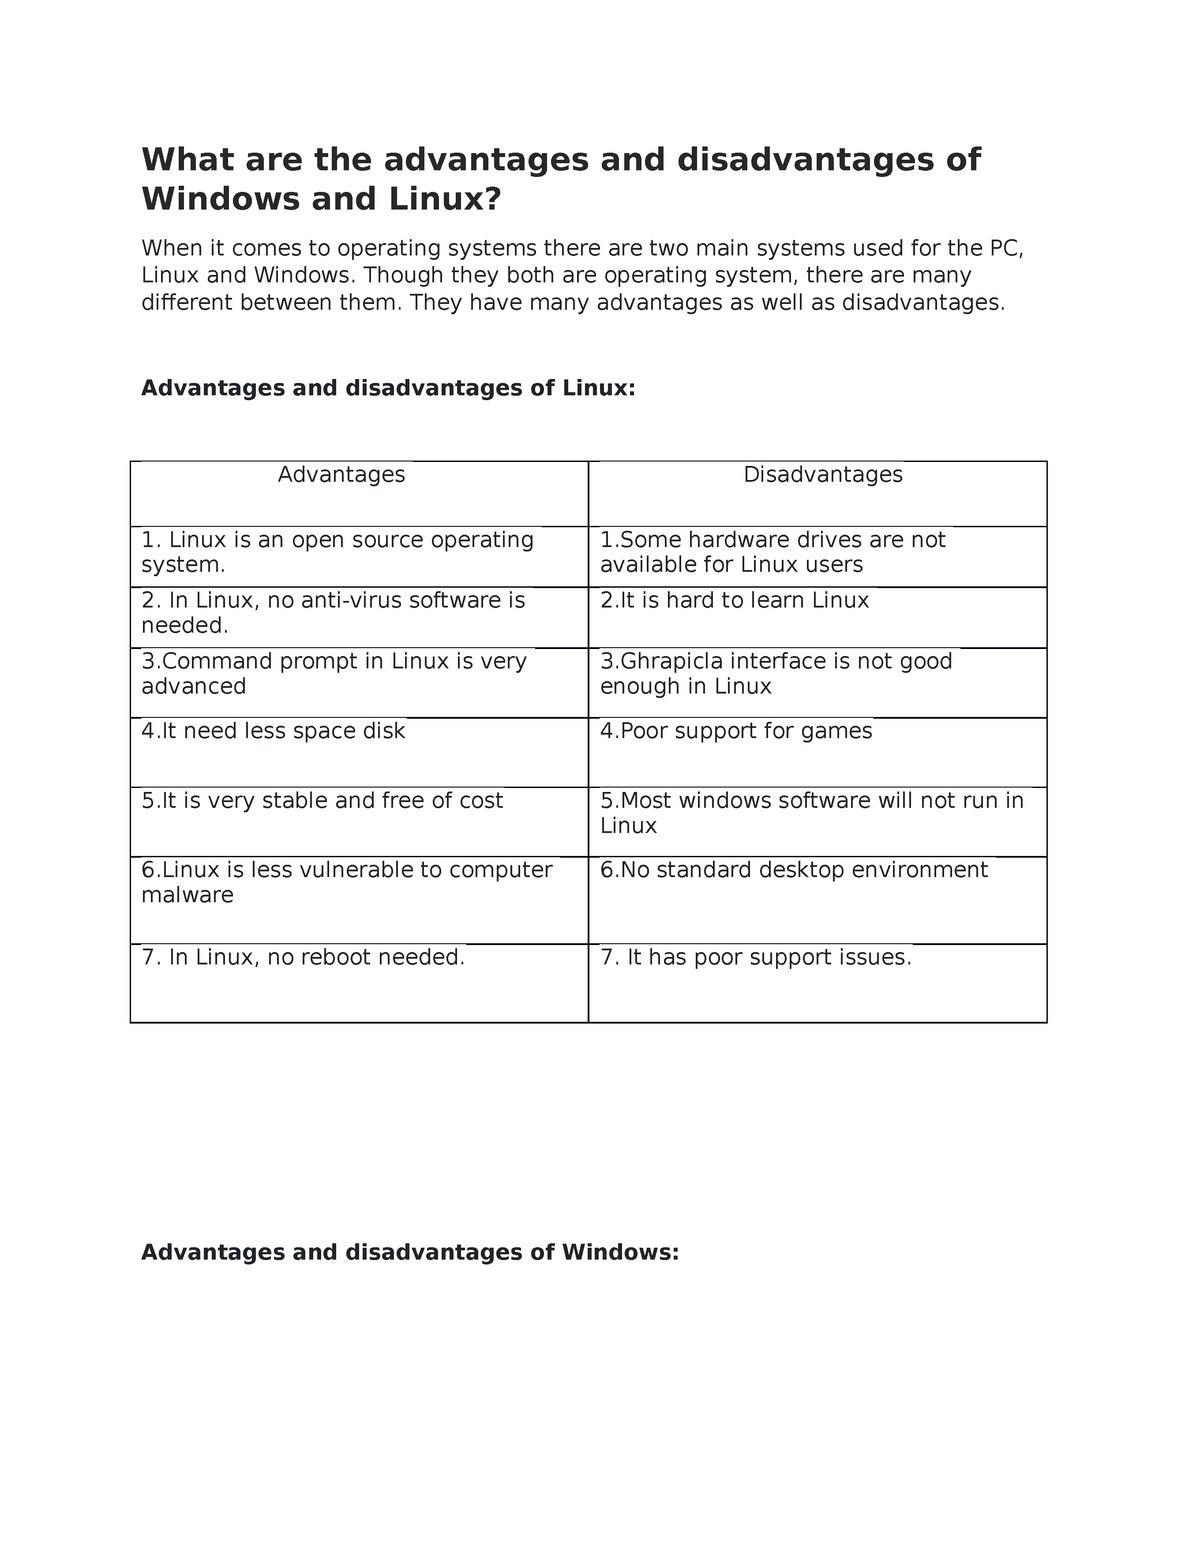 What are the advantages and disadvantages of Windows and Linux?